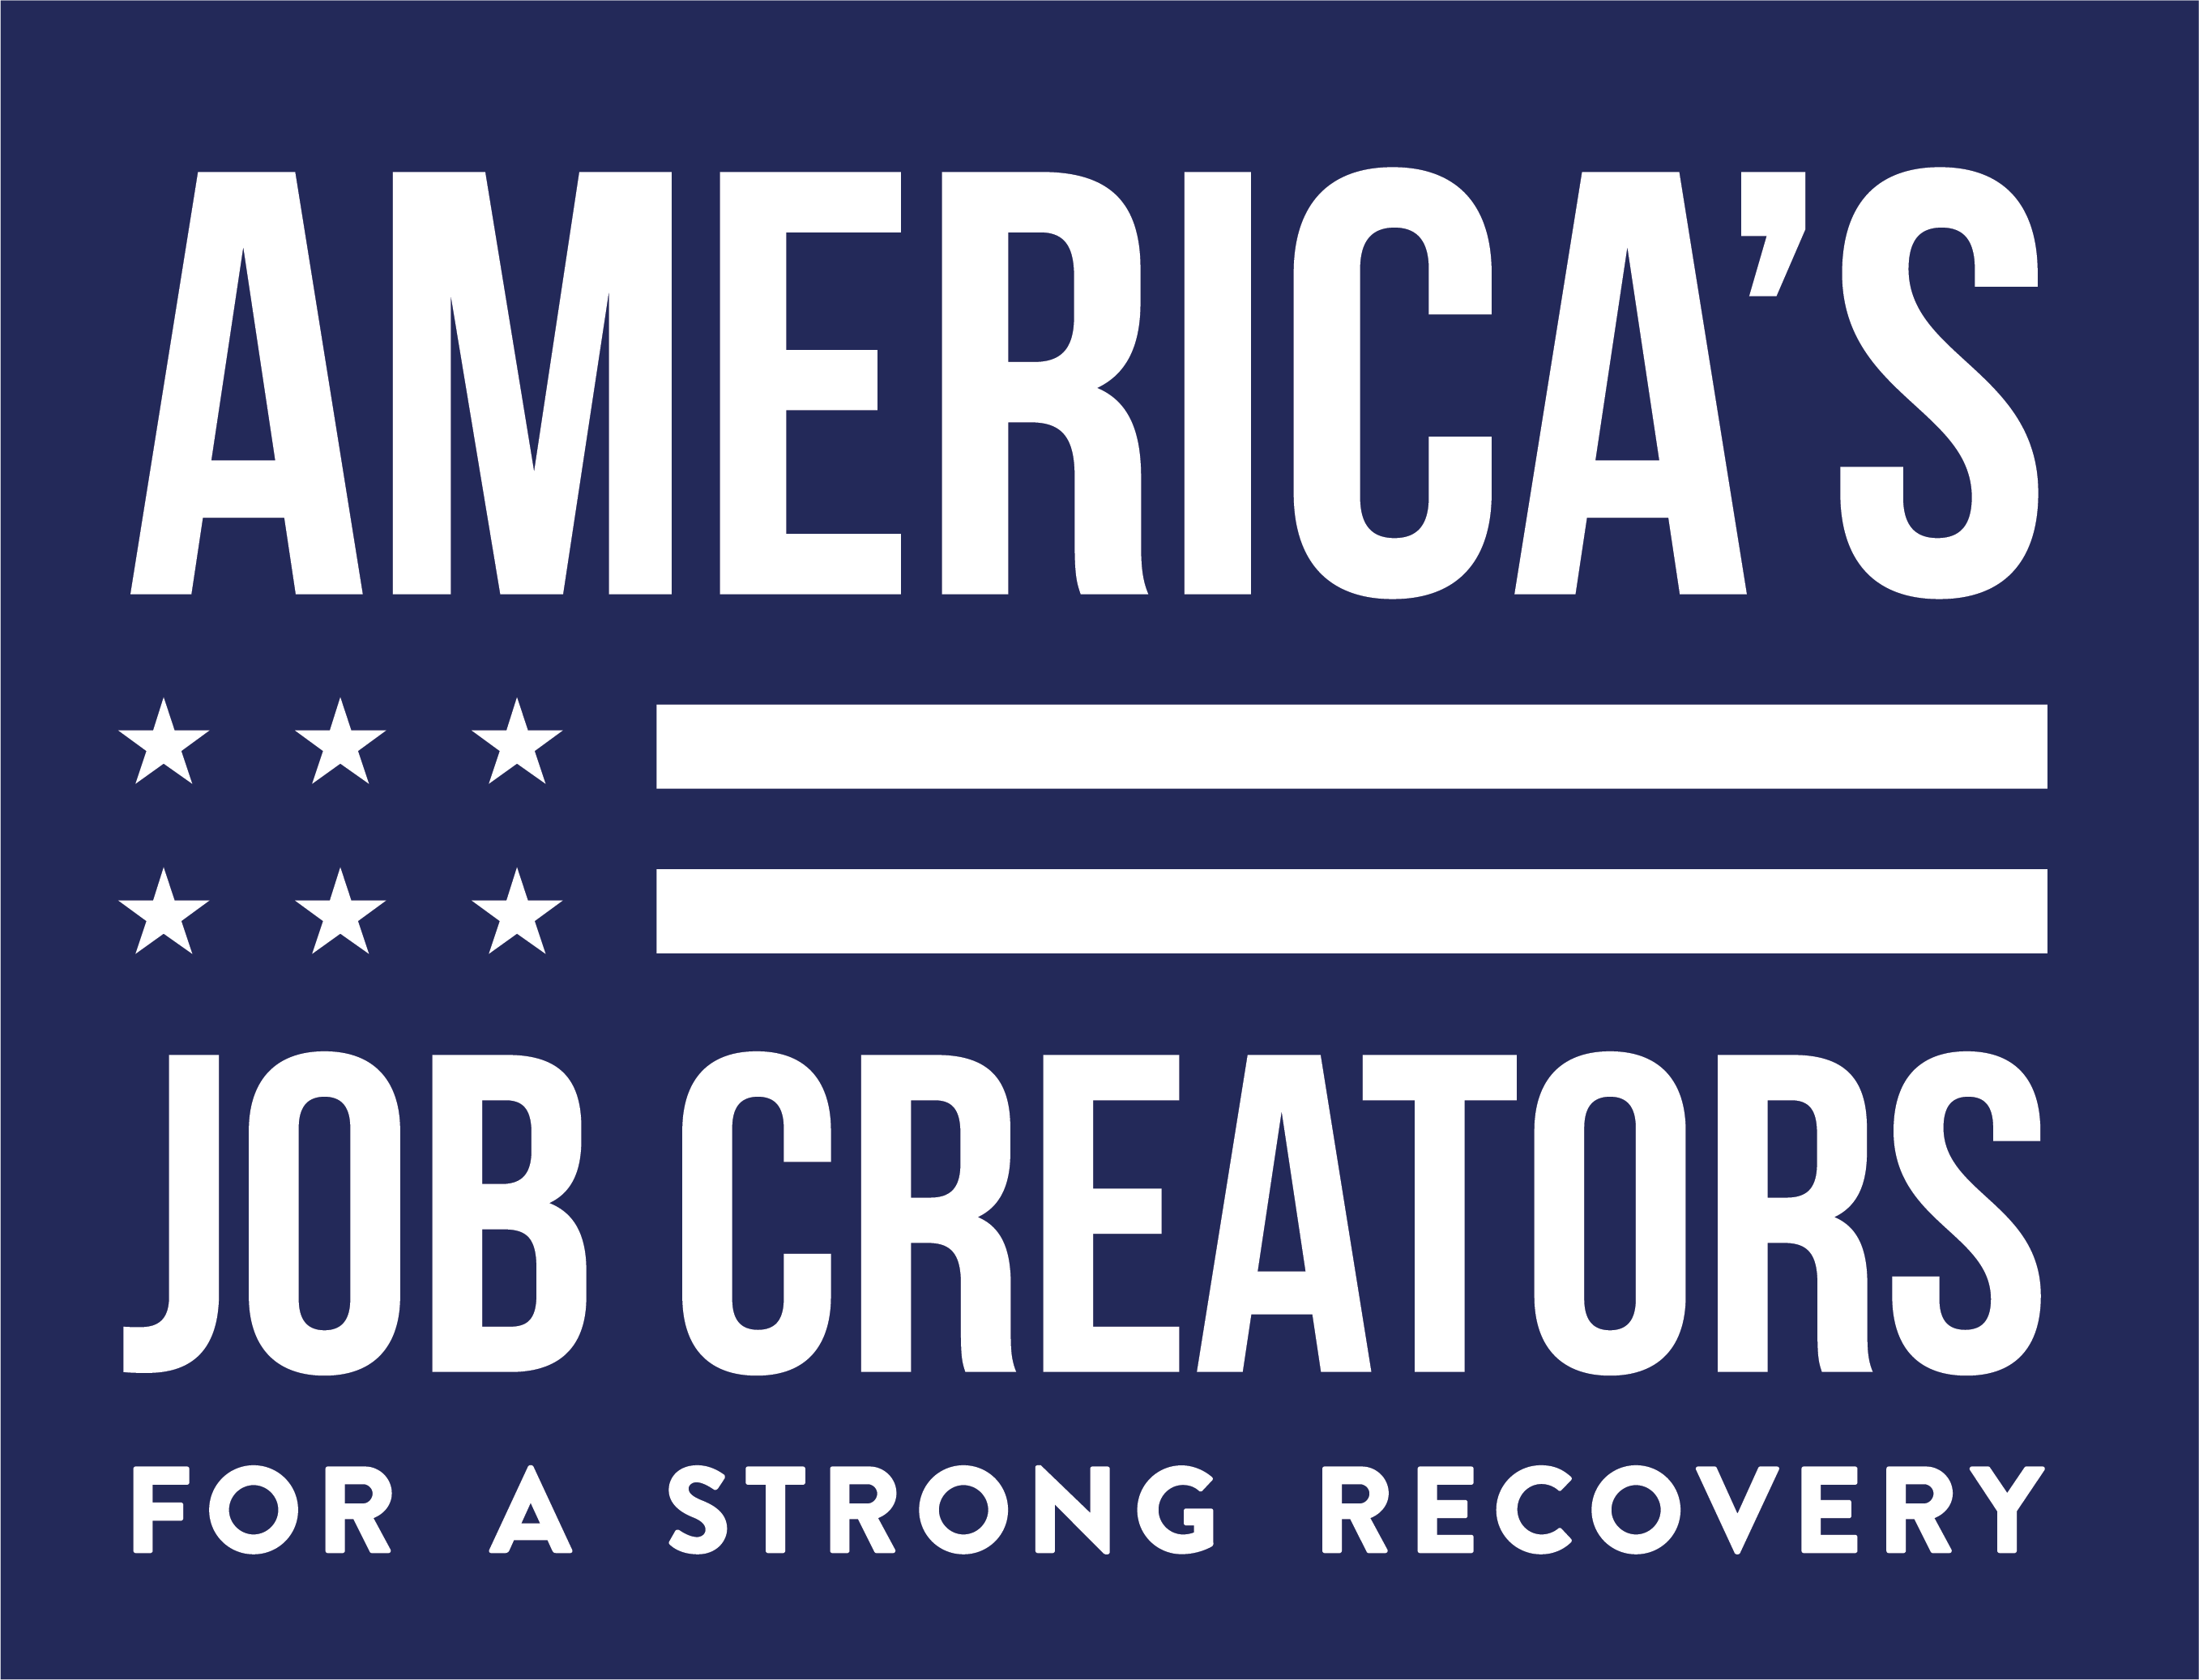 America's Job Creators For A Strong Recovery - LOGO